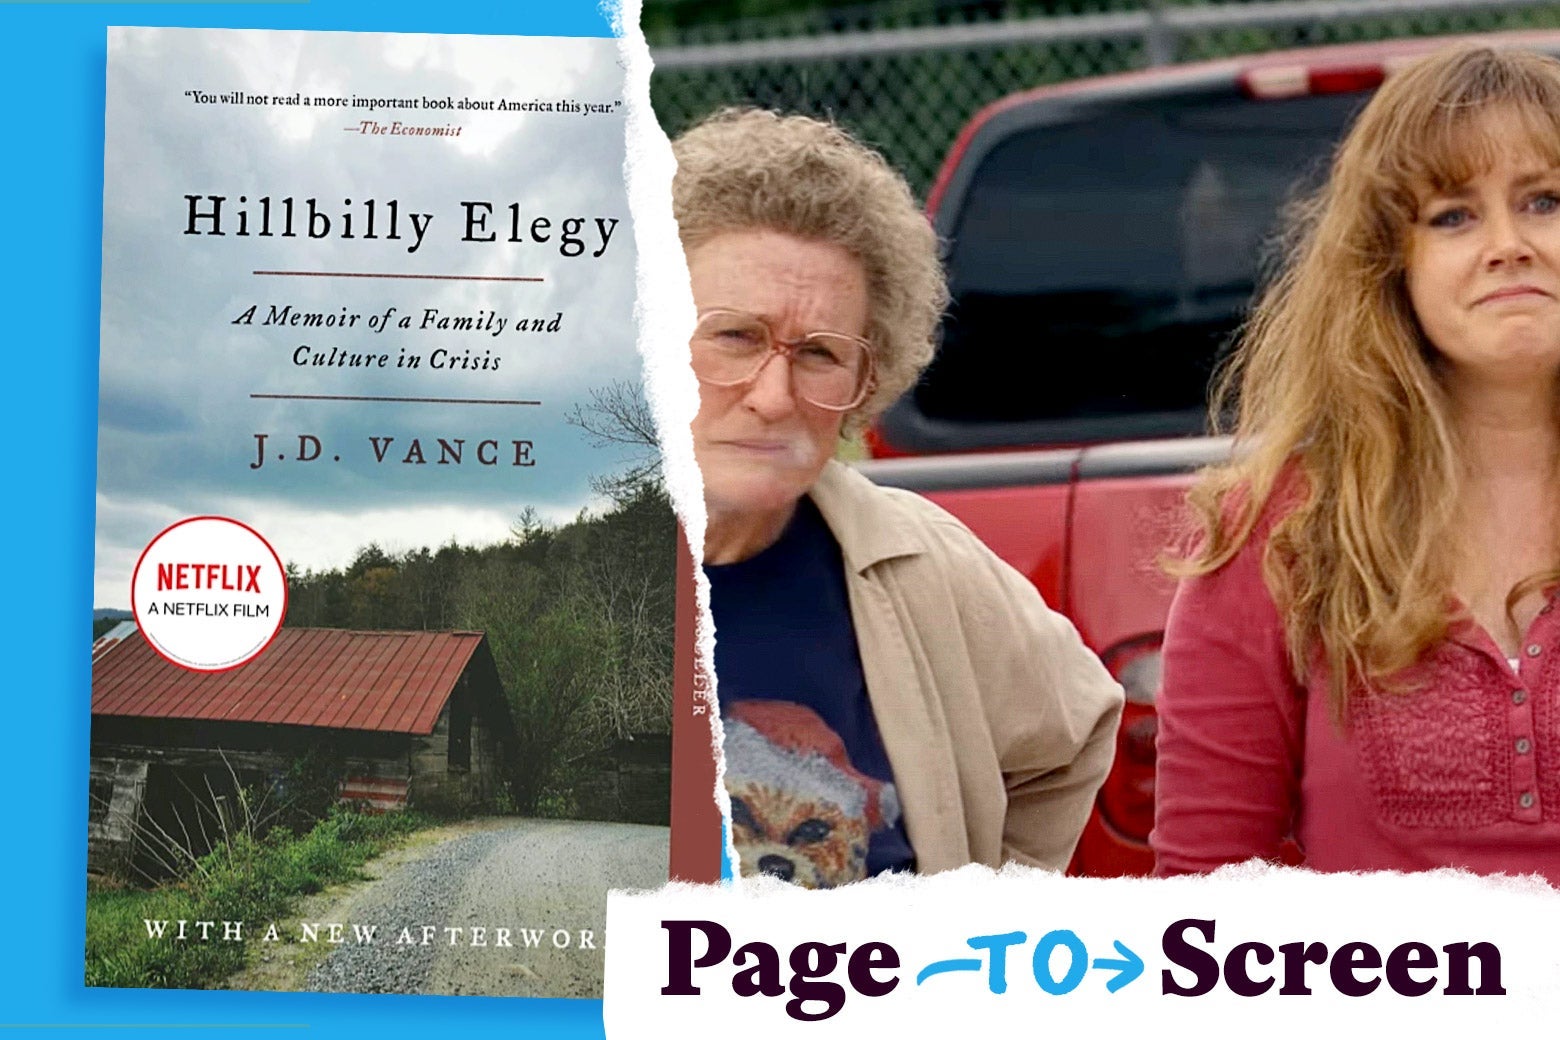 The cover of Hillbilly Elegy and a still of the film with Glenn Close and Amy Adams.